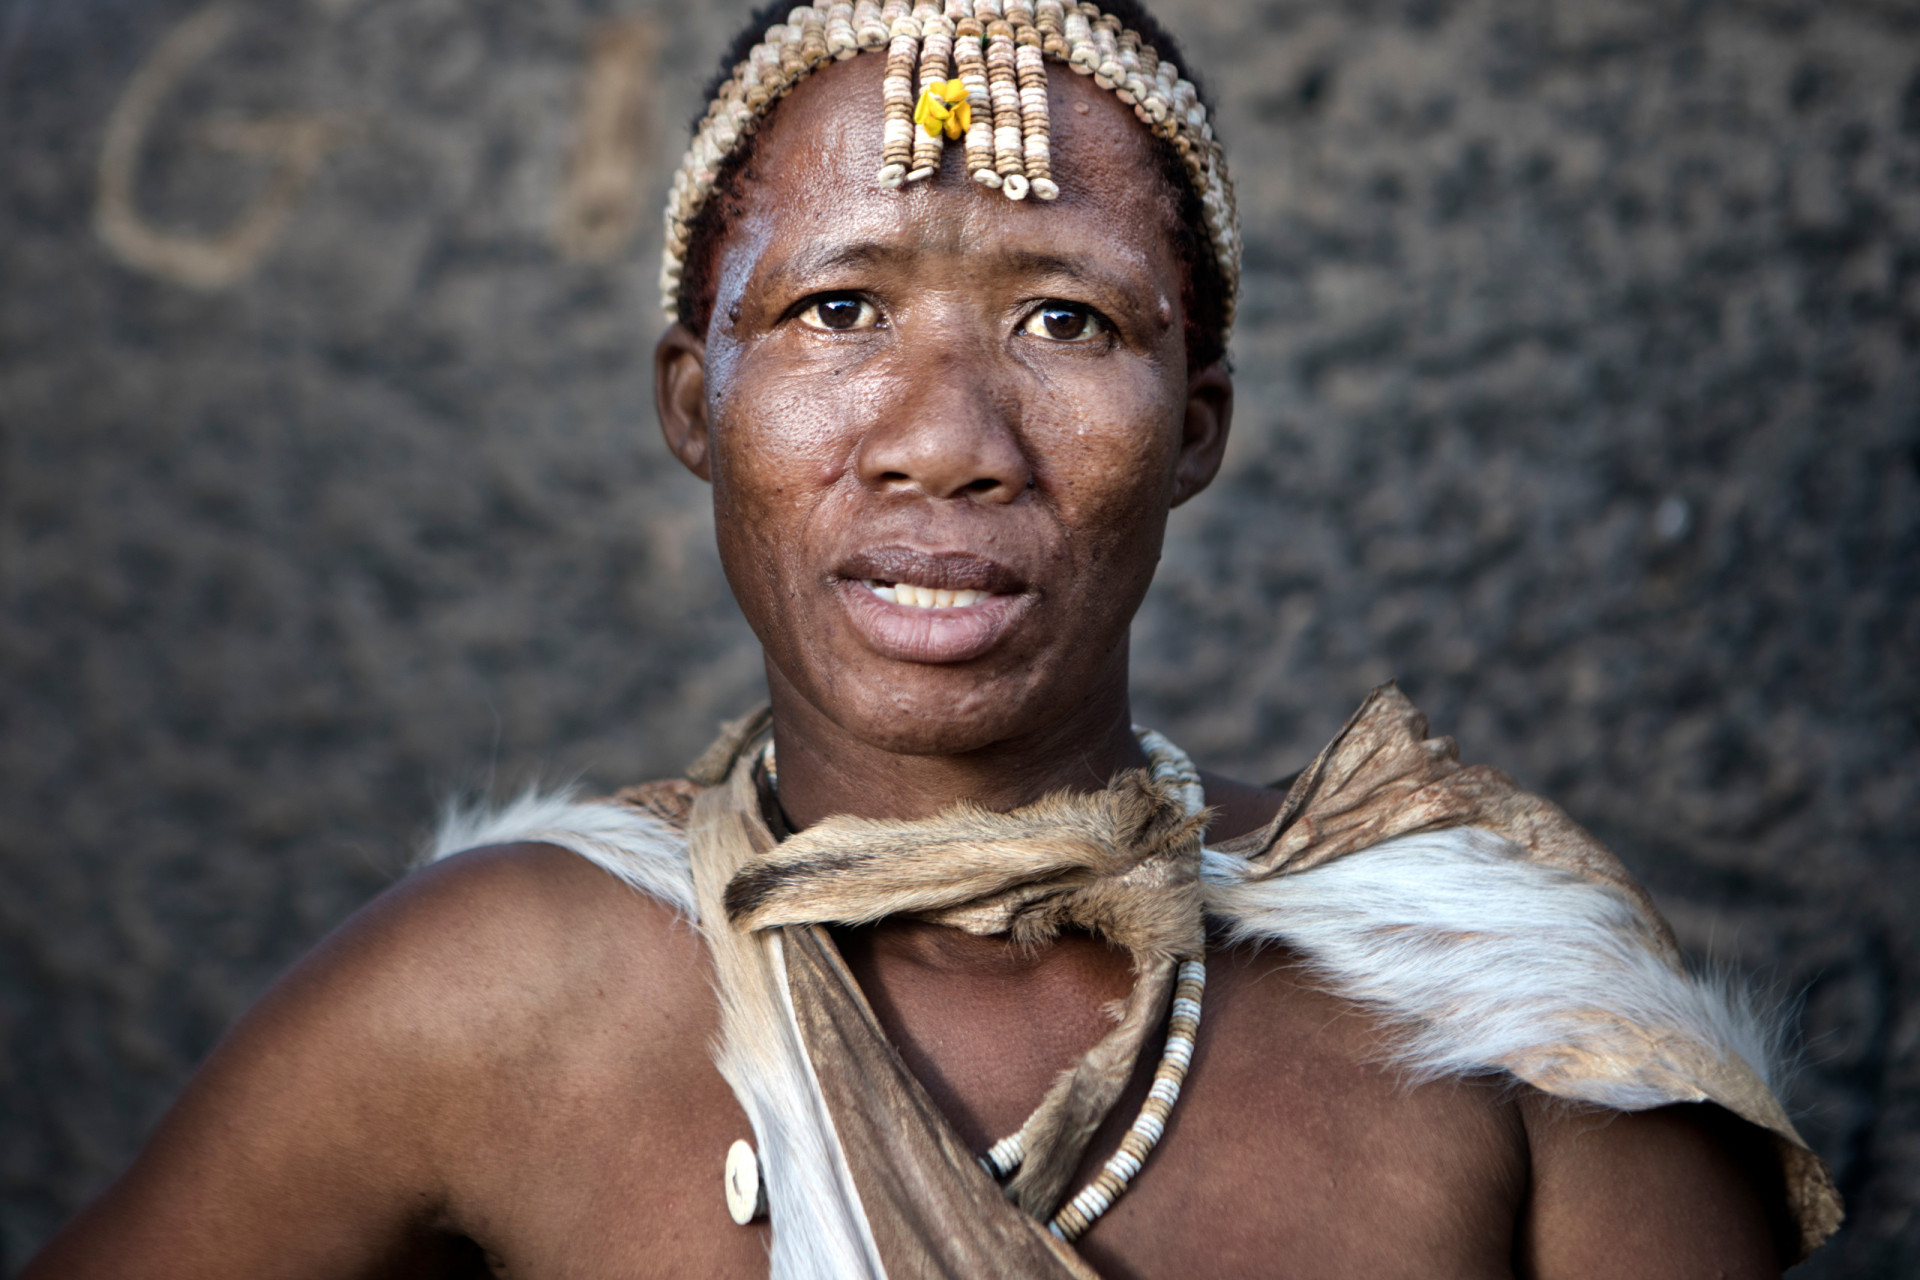 <p>Although the Khoikhoi culture is an umbrella for multiple tribes, it is important to distinguish them, as they have a rich oral tradition of storytelling and poetry that has affected much of Southern Africa.</p><p><a href="https://www.msn.com/en-us/community/channel/vid-7xx8mnucu55yw63we9va2gwr7uihbxwc68fxqp25x6tg4ftibpra?cvid=94631541bc0f4f89bfd59158d696ad7e">Follow us and access great exclusive content every day</a></p>